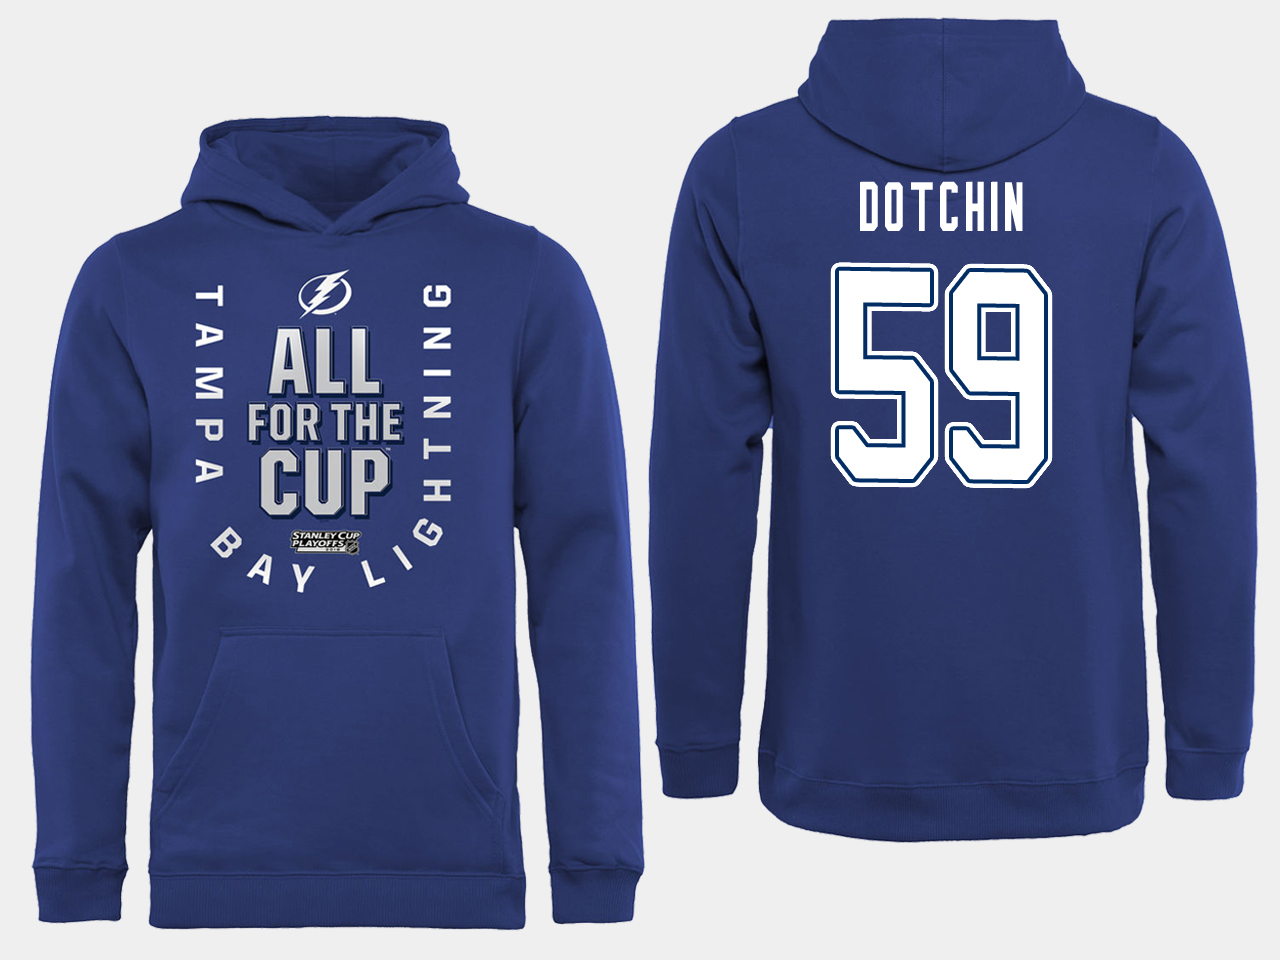 NHL Men adidas Tampa Bay Lightning 59 Dotchin blue All for the Cup Hoodie